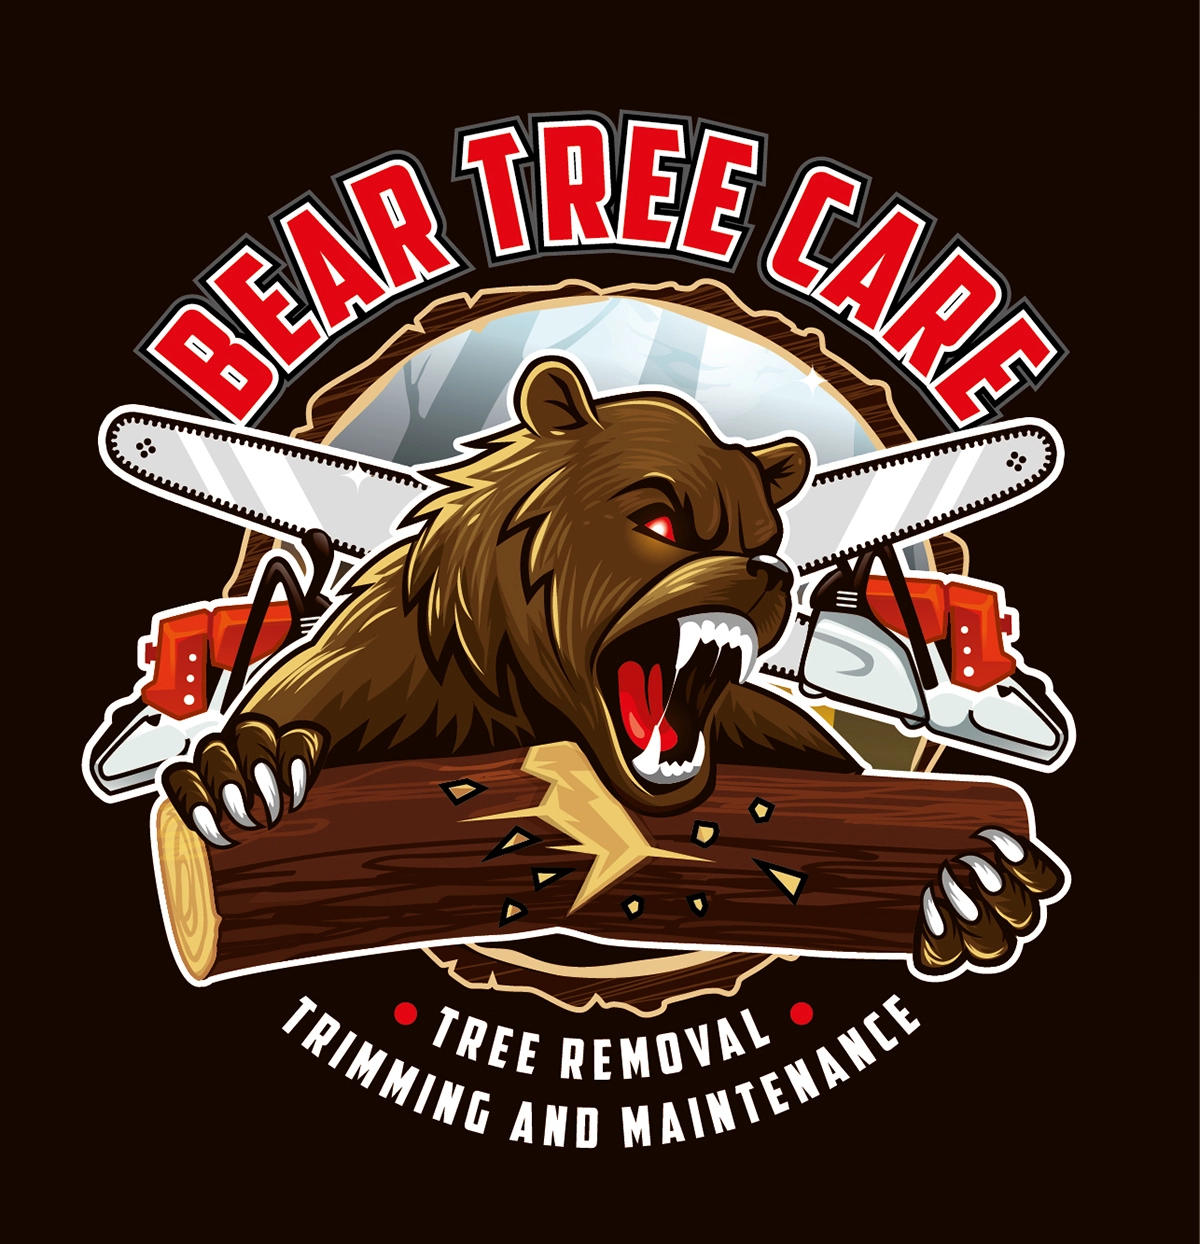 Bear Tree Care LLC - Firemen Owned and Operated Logo